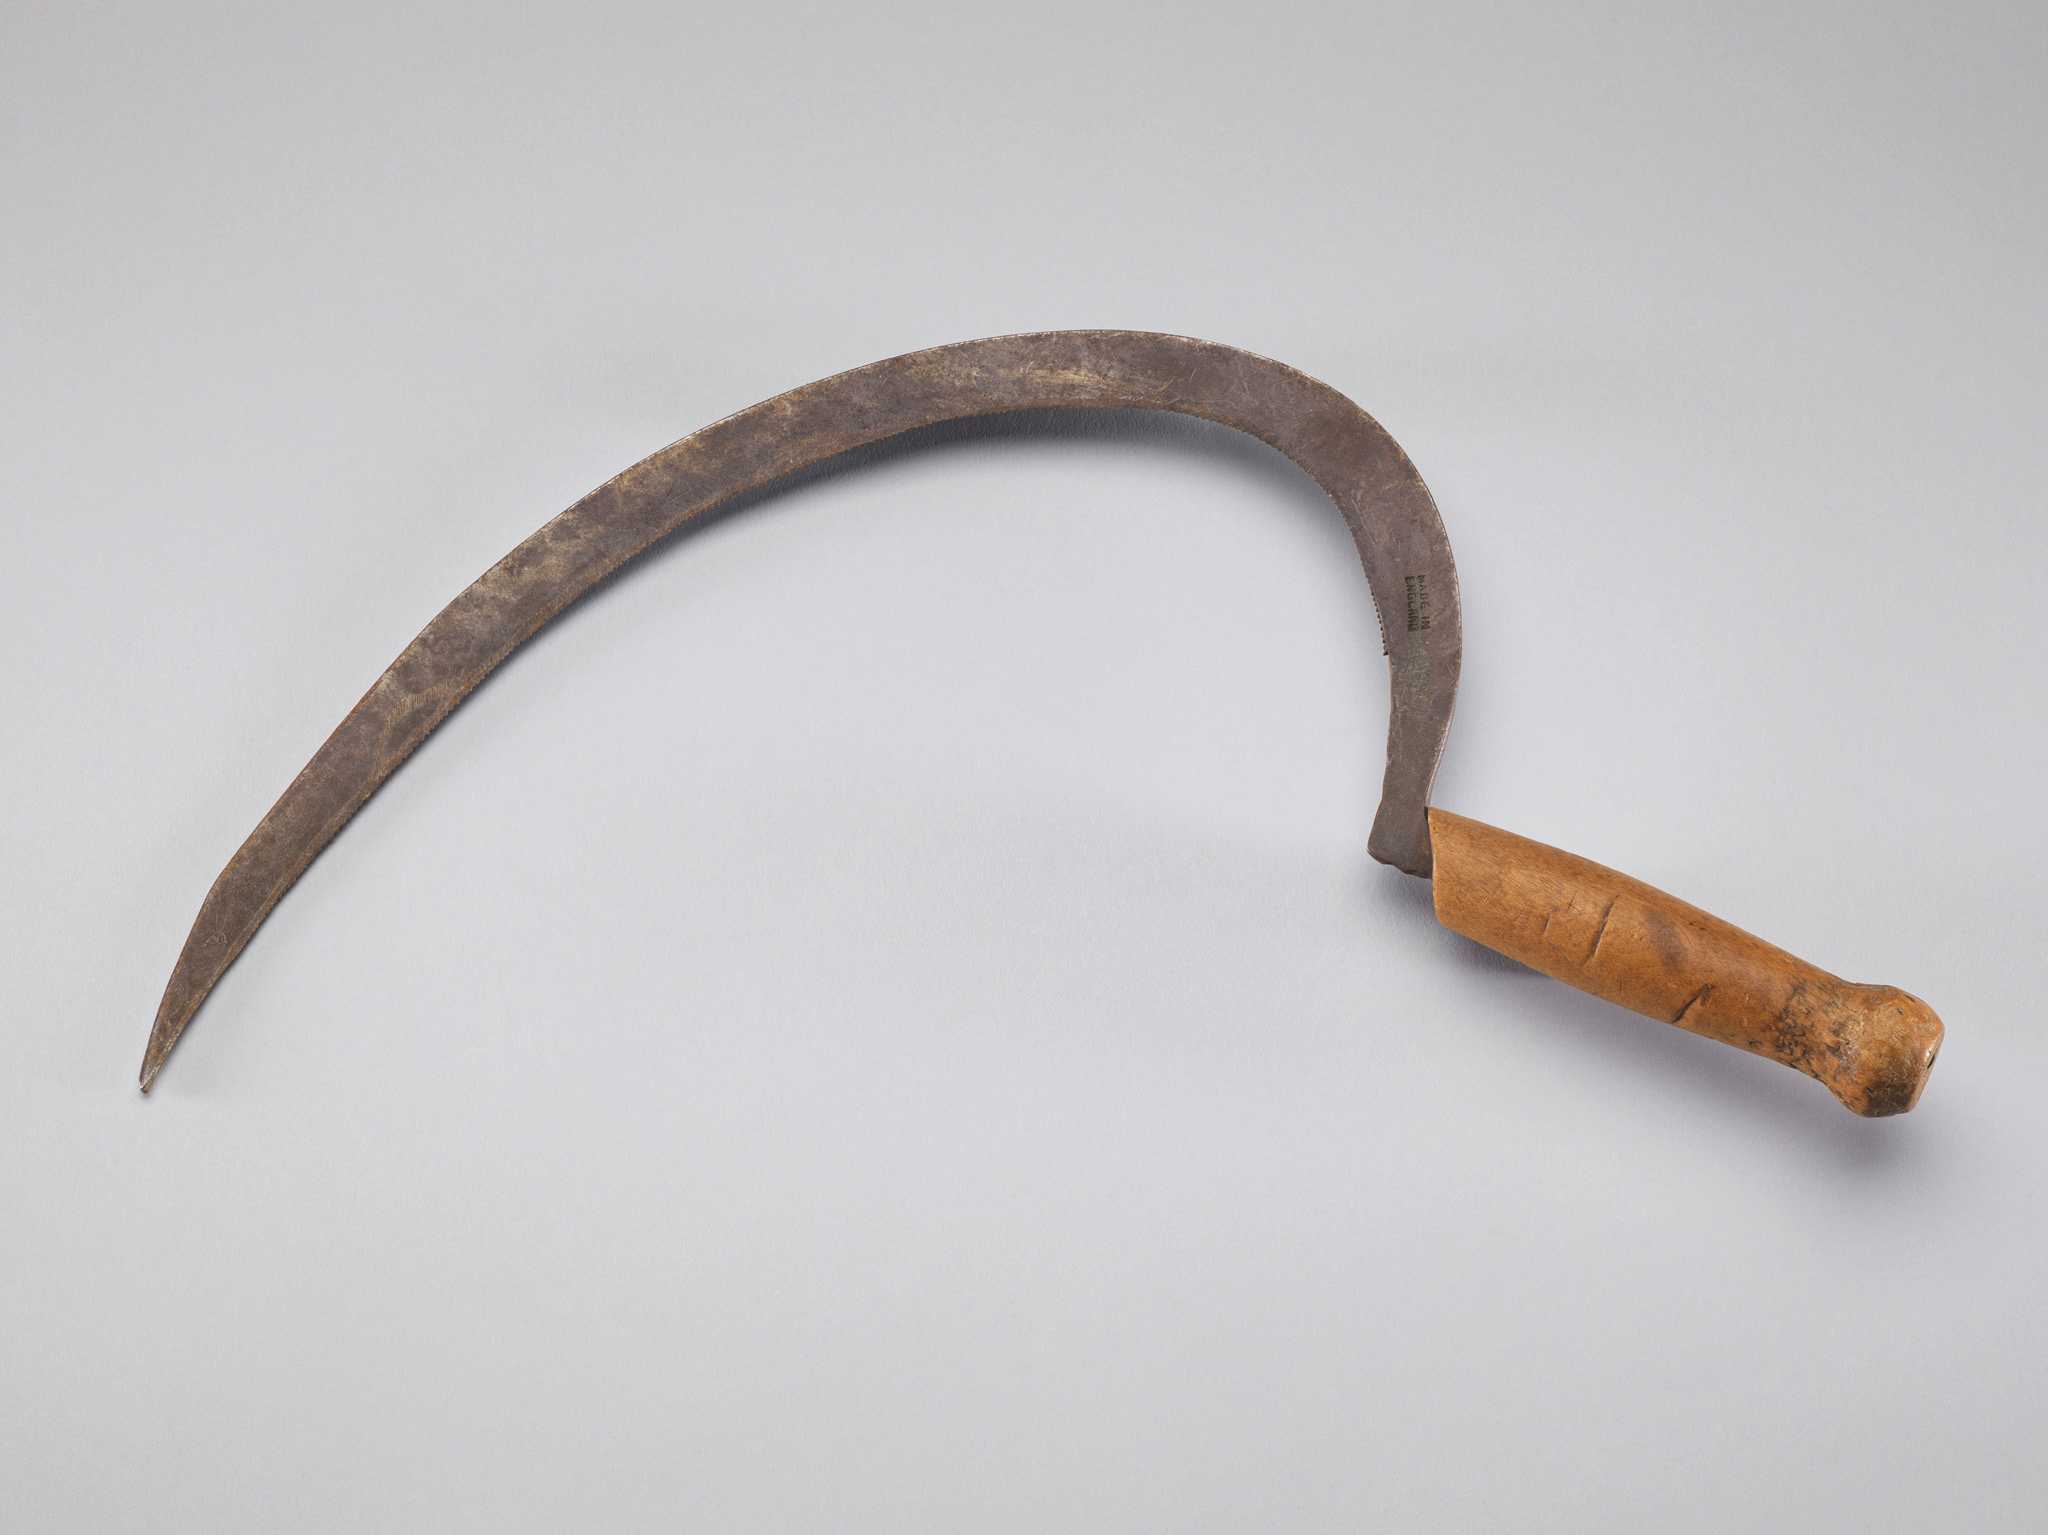 A rice sickle with a wooden handle. The sickle has a short, wooden handle with a curved grip and a rounded base. Carved on the side of the handle are the letters [W Y]. The blade is J-shaped with a serrated interior edge. Stamped on the blade near the handle is a mark that reads [MADE IN / ENGLAND]. The blade's tang protrudes from the bottom of the handle. Attached to the blade is a white paper tag with handwritten, black ink text that reads [SICKLE].